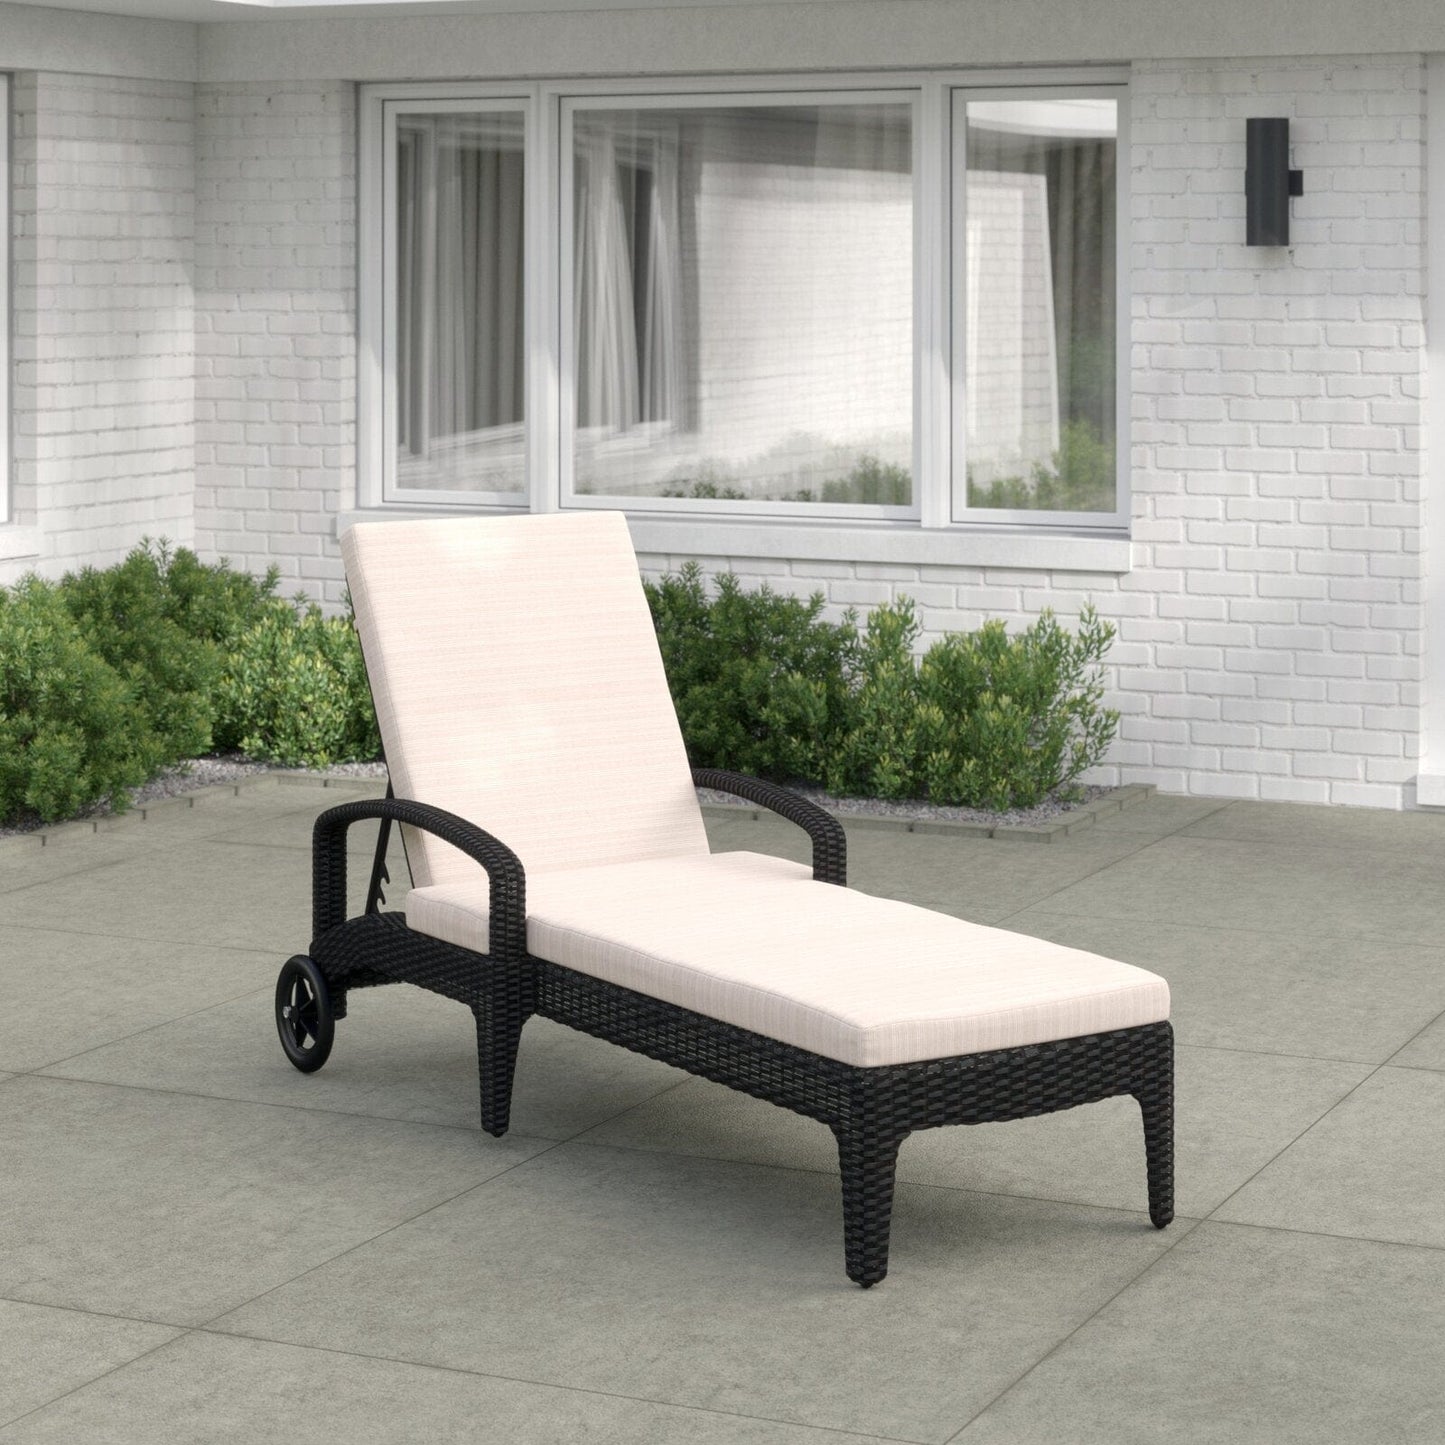 Dreamline Outdoor Poolside Lounger With Cushion (Black)